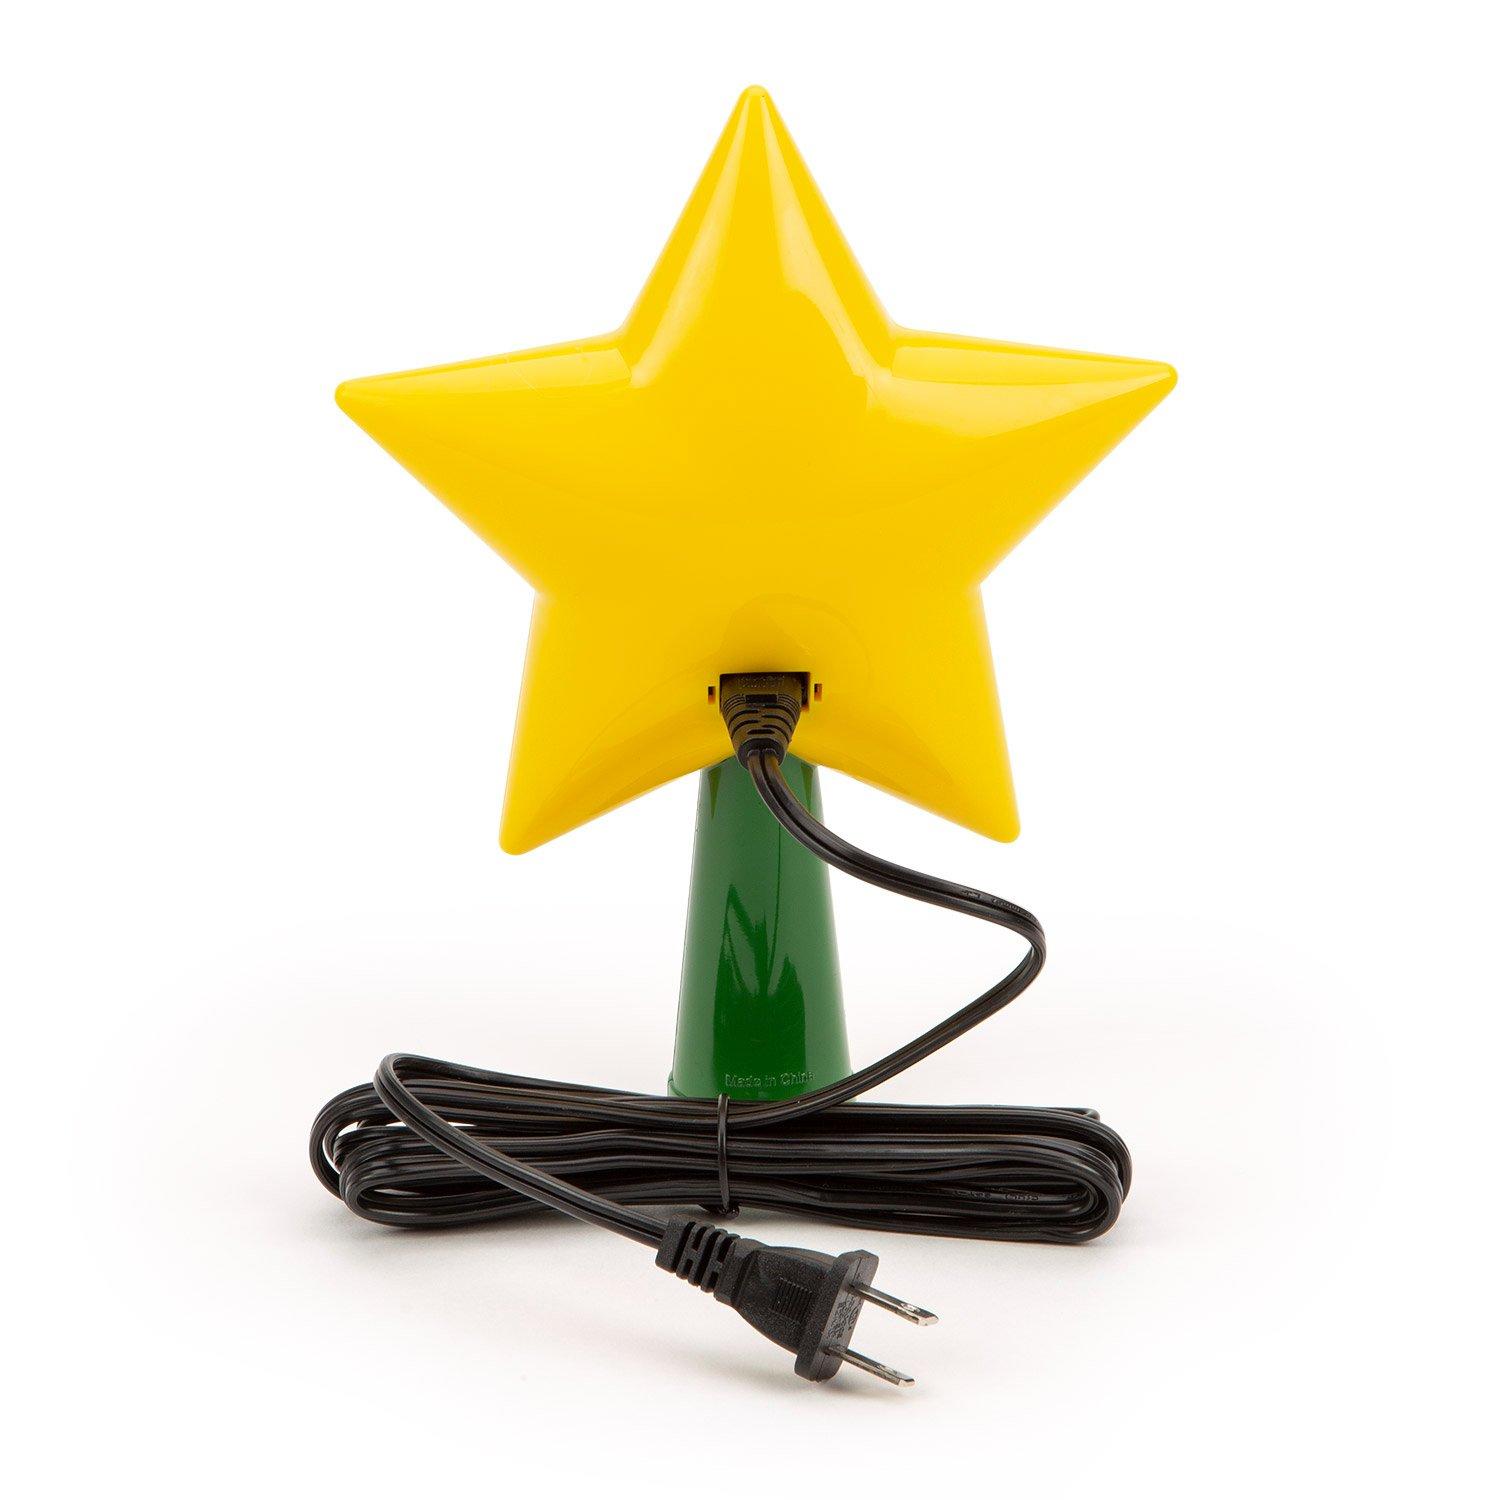 Super Mario Star 9-in Christmas Tree Topper